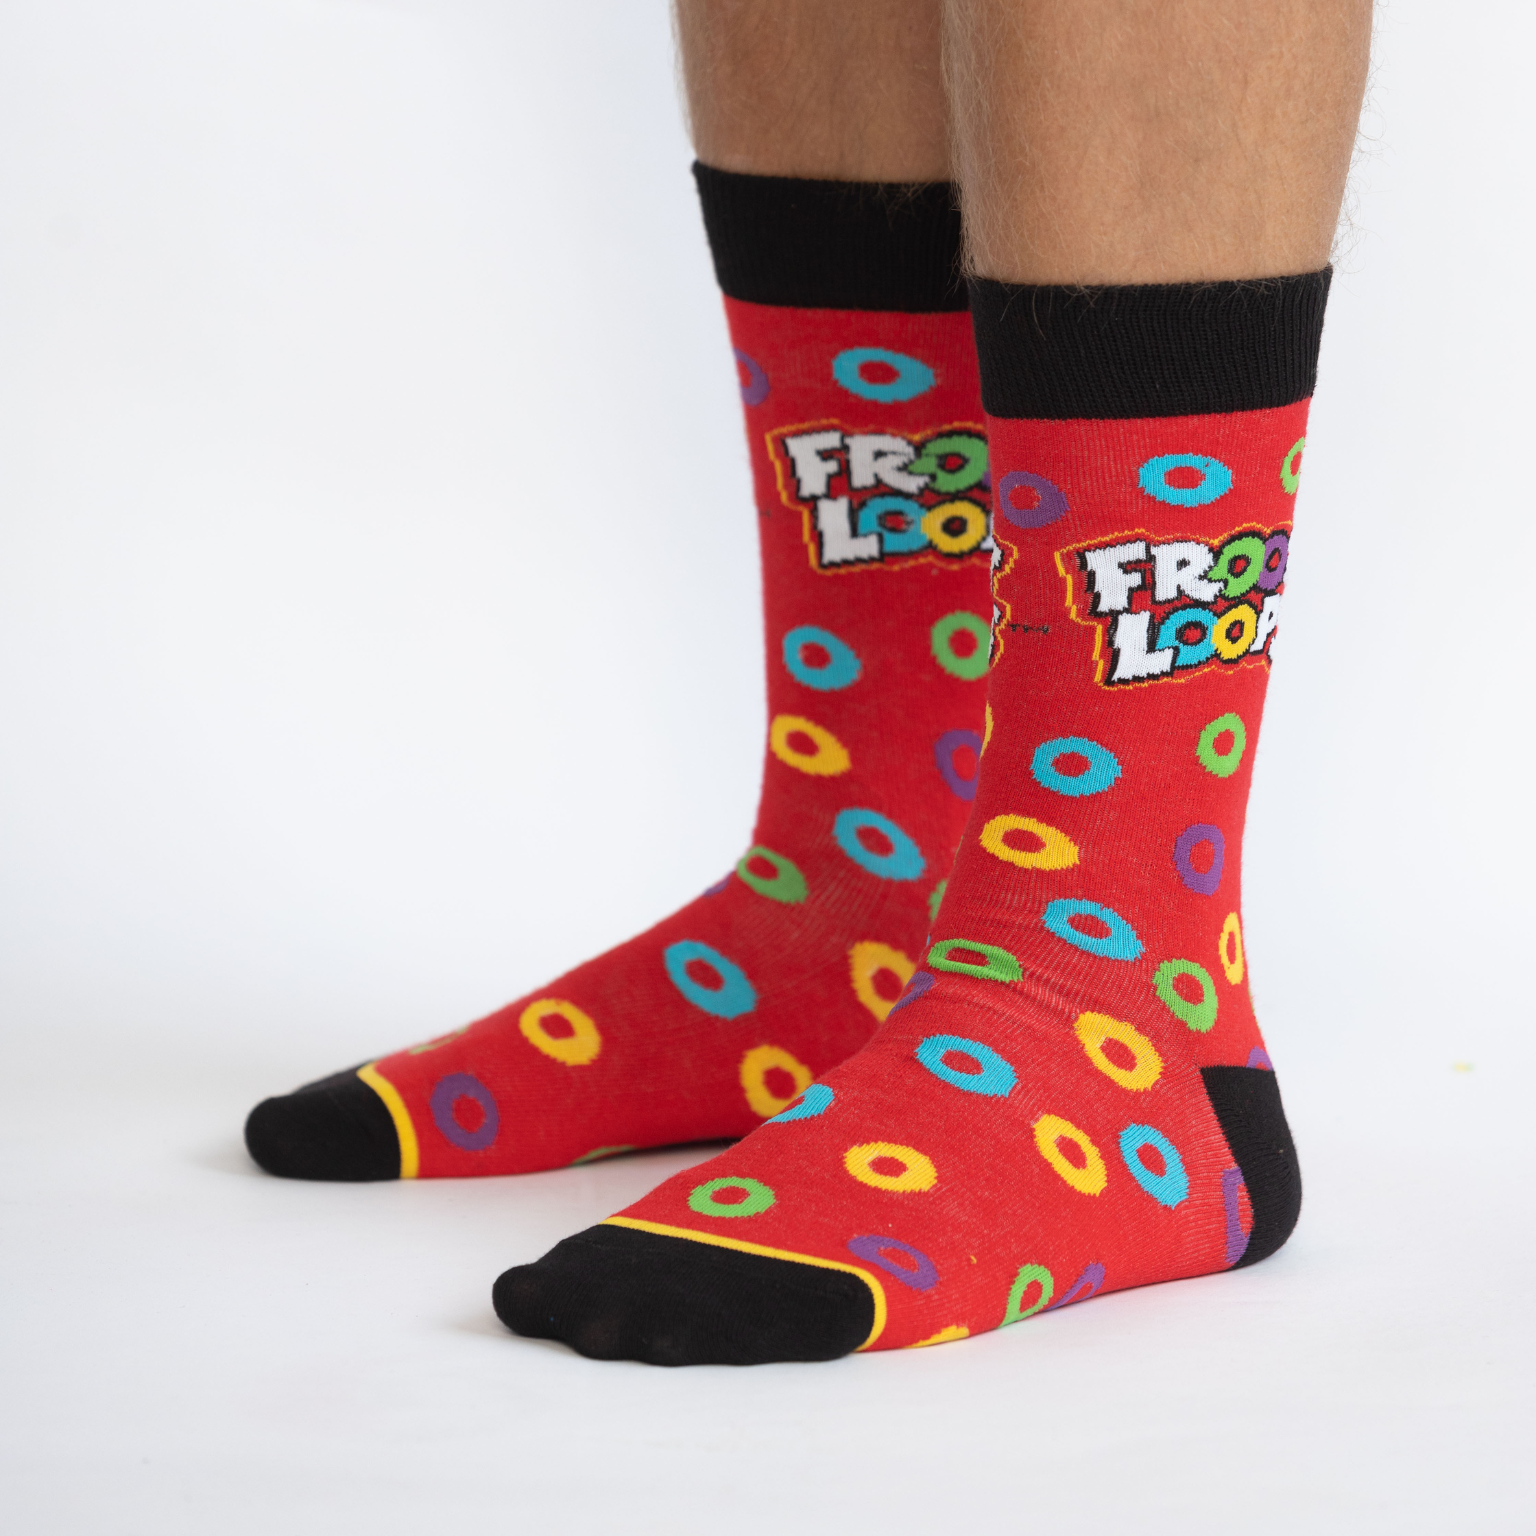 Kellogg's Merch - Start Your Day with Swag Cereal Boxers & Socks